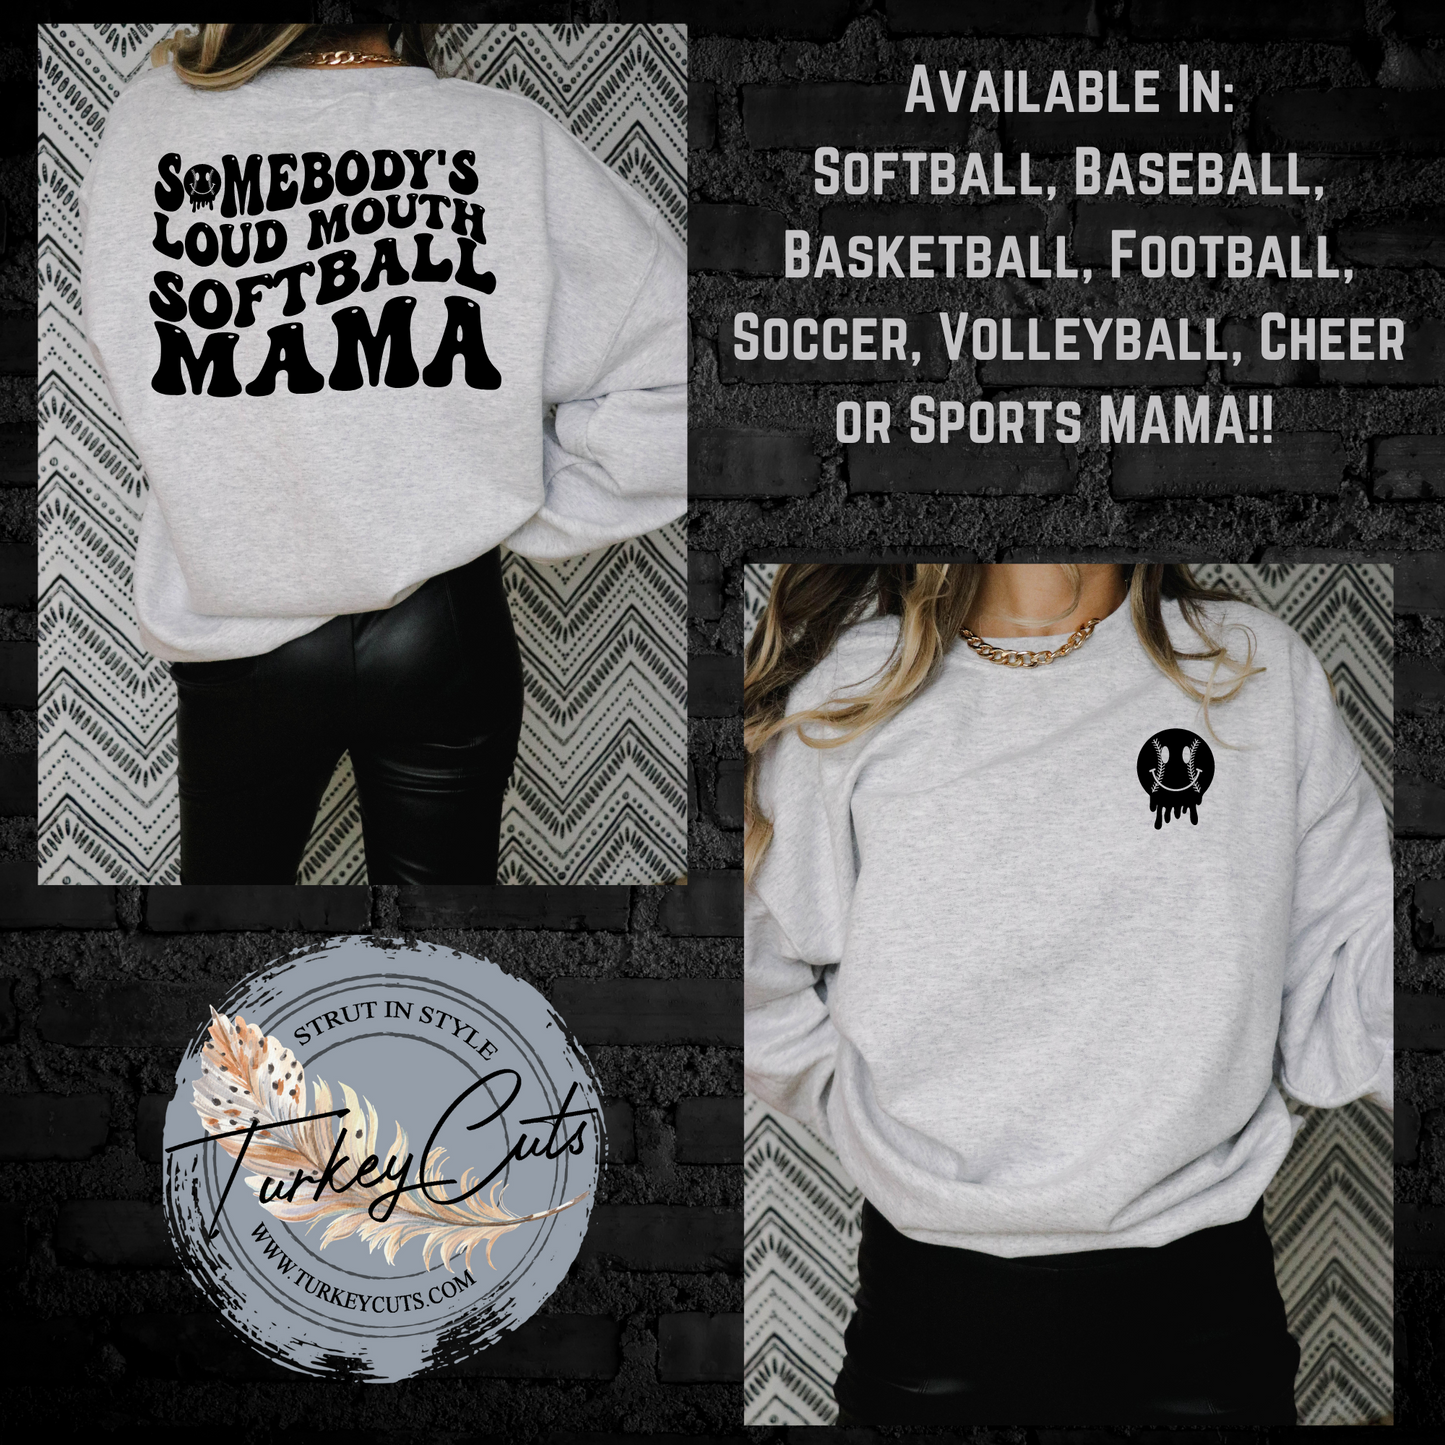 Loud Mouth Sports Mama (MANY sports available)